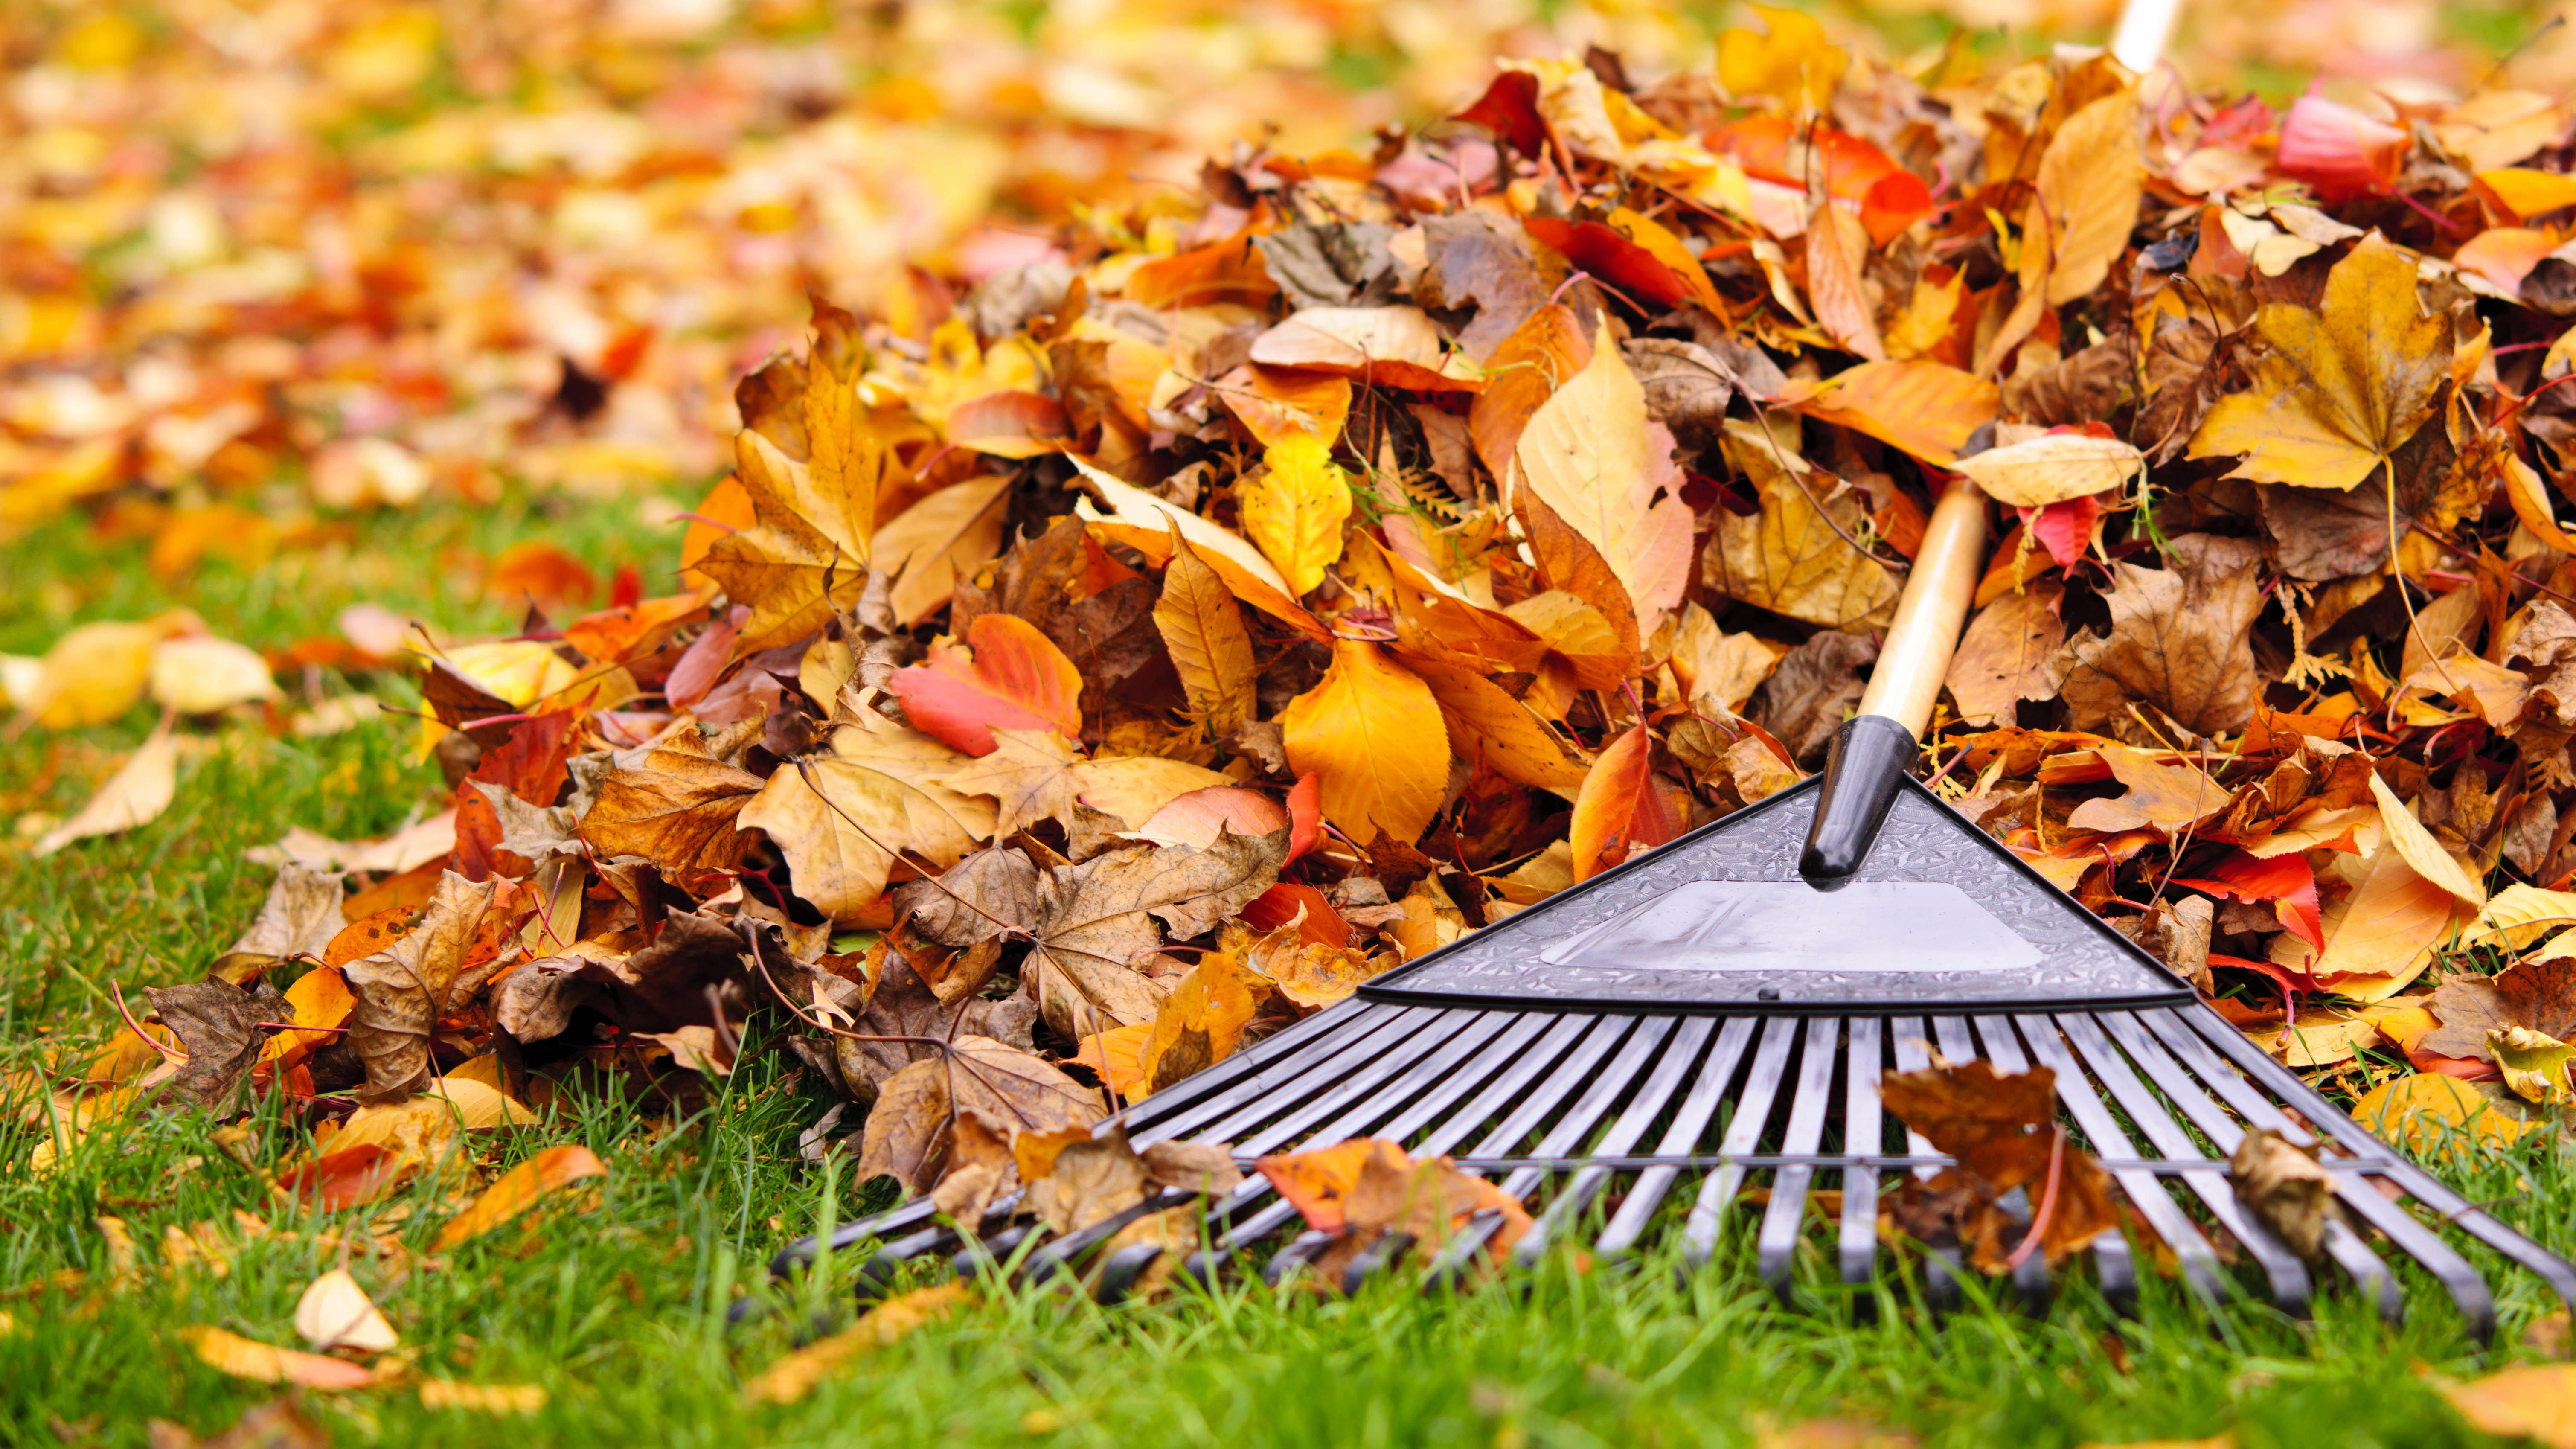 Networx: What to do with fallen leaves